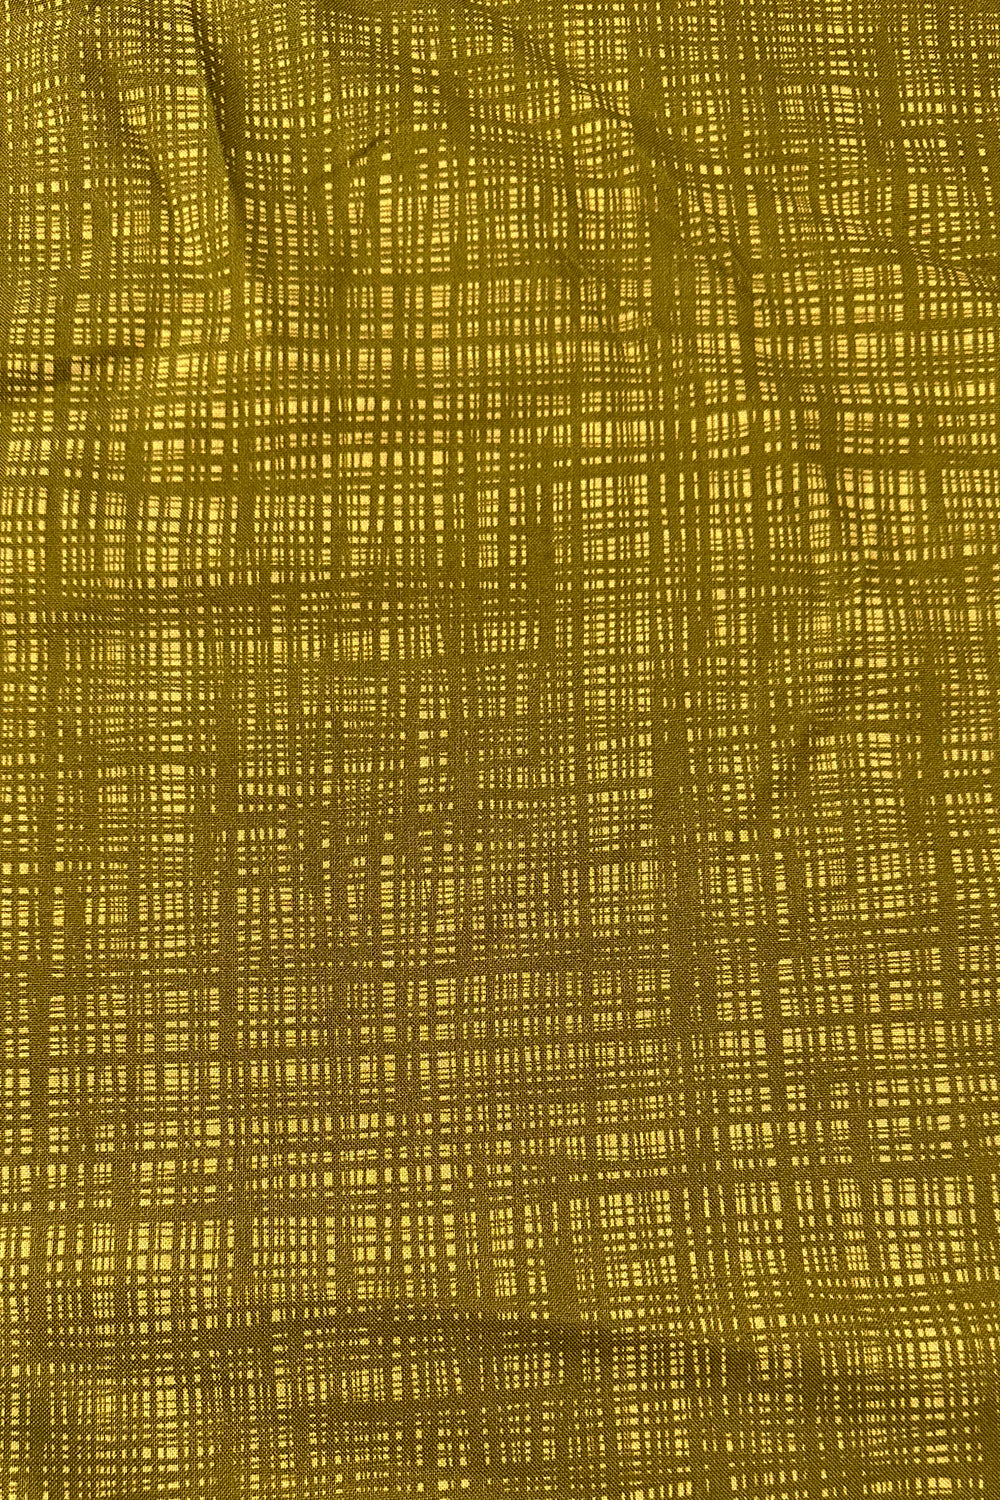 A Ghastile Weave in Olive Cotton Fabric by the yard